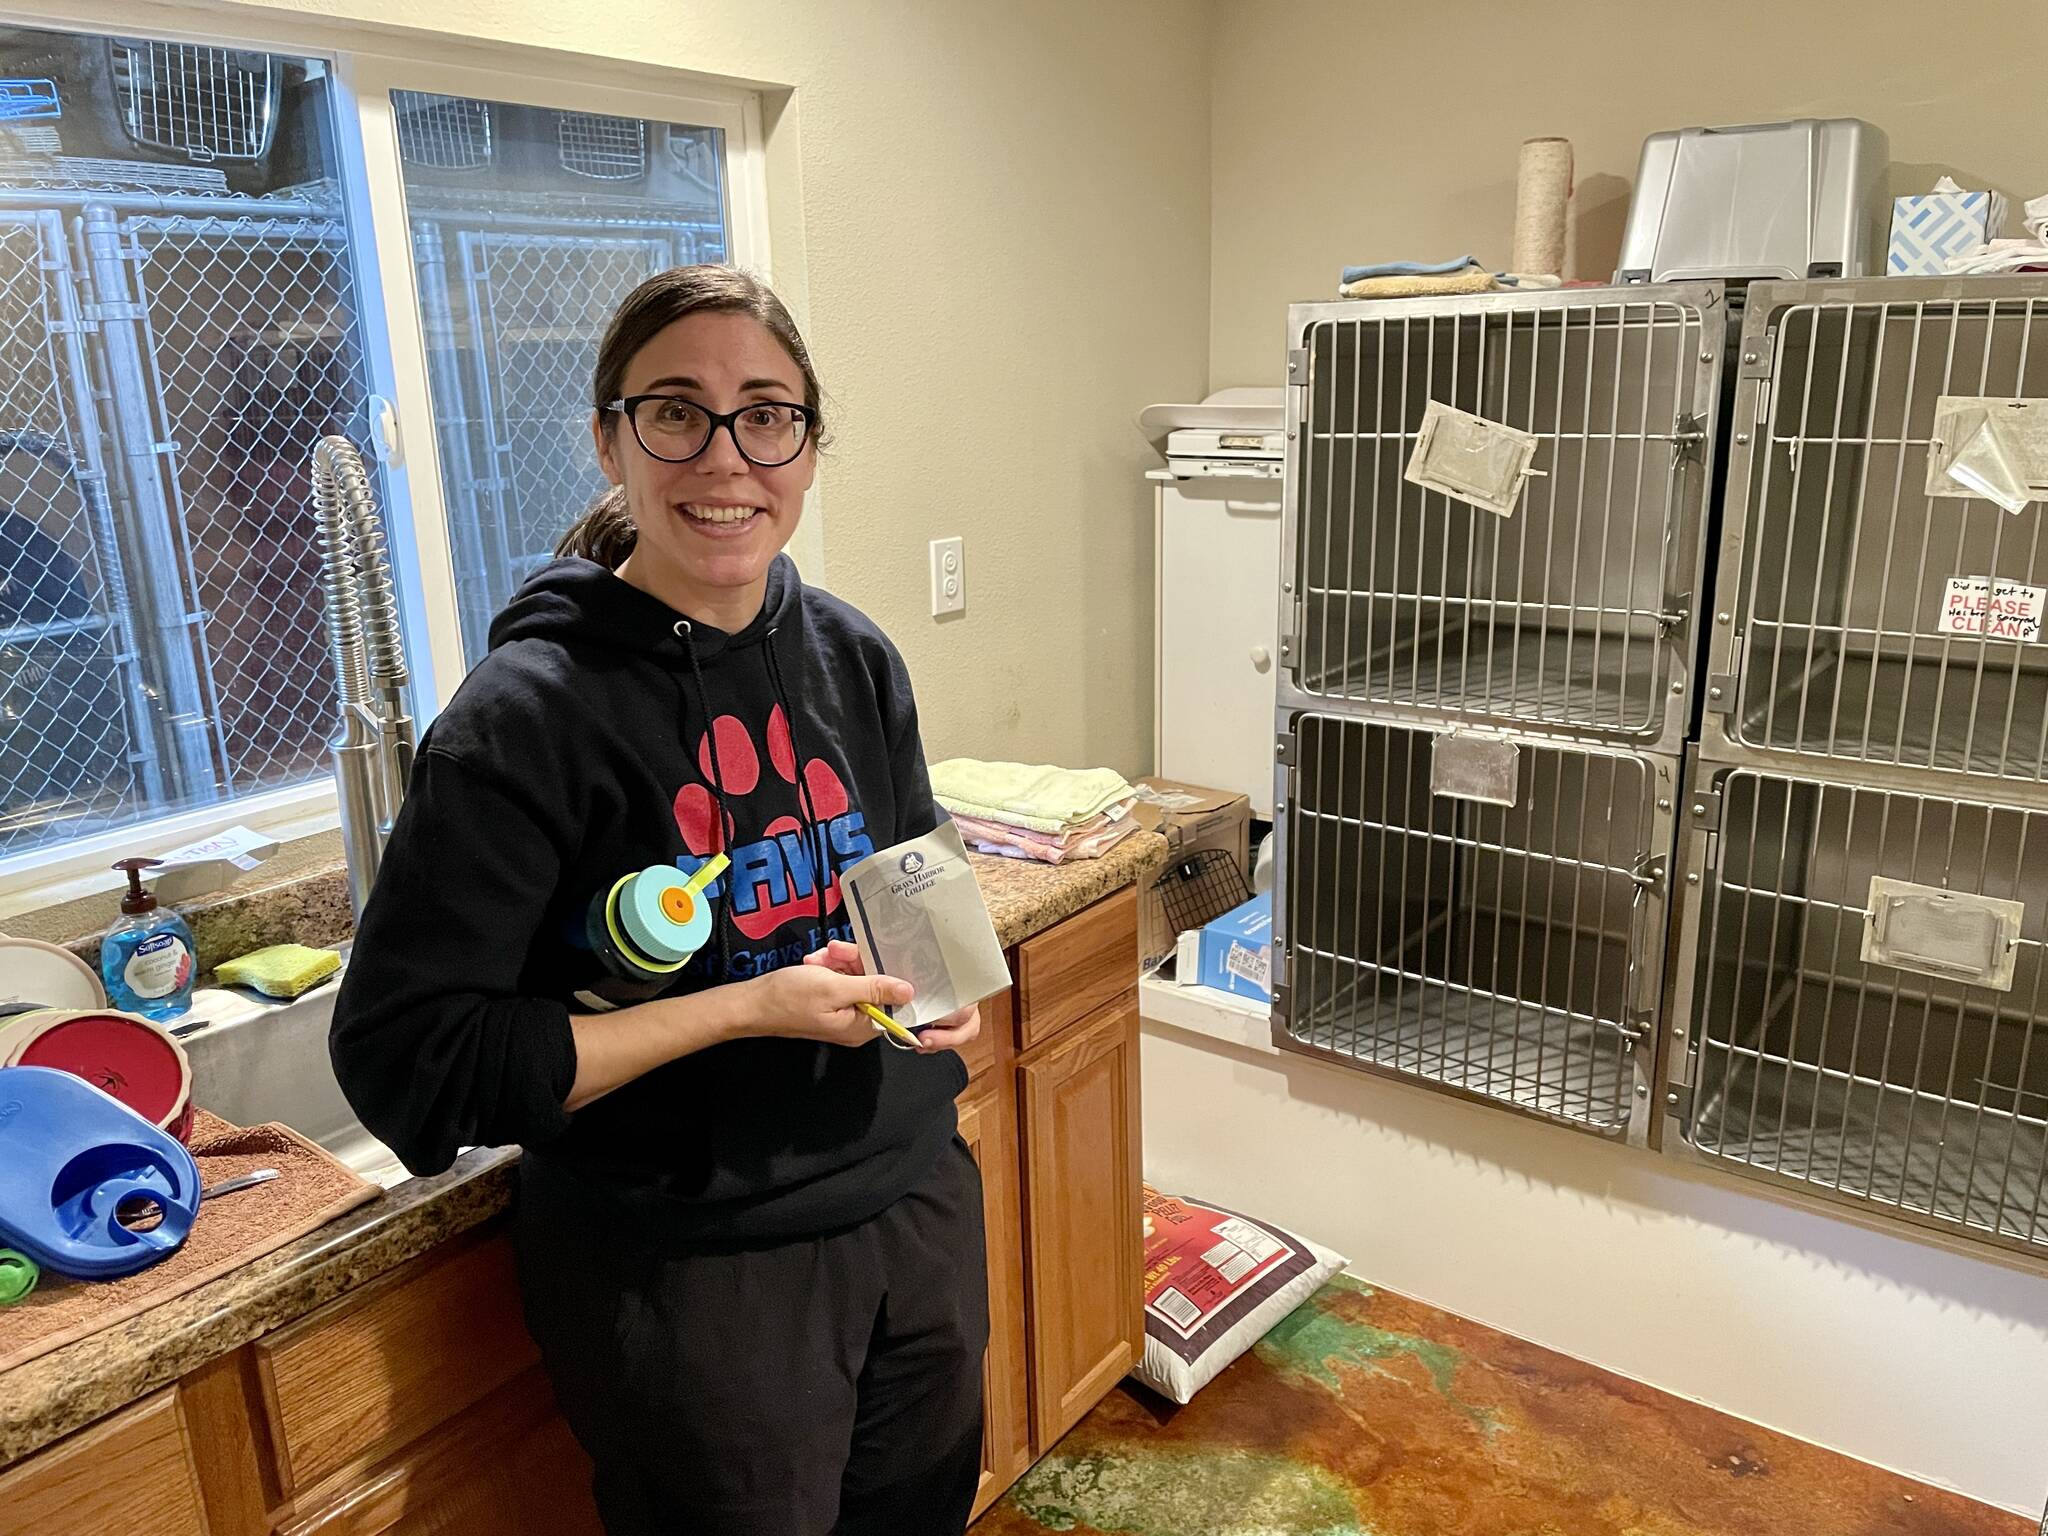 Anne Boeche, executive director of PAWS of Grays Harbor, shows off the shelter’s quarantine room on Oct. 4. The shelter is holding a fundraiser on Oct. 8 to raise money for renovations. (Michael S. Lockett | The Daily World)